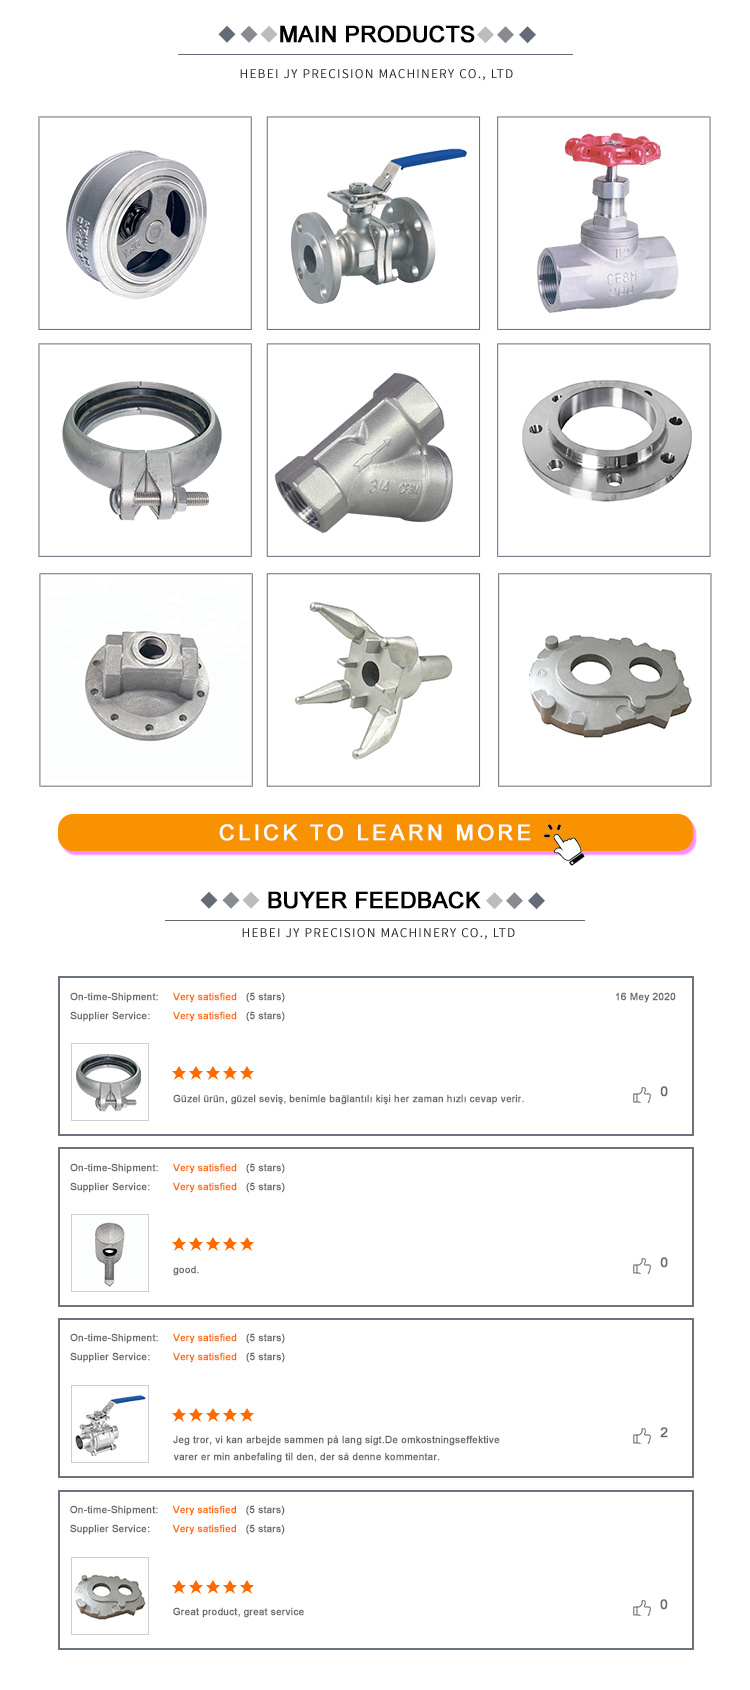 Investment Casting Fence Fastener Clamping Element Agricultural Parts